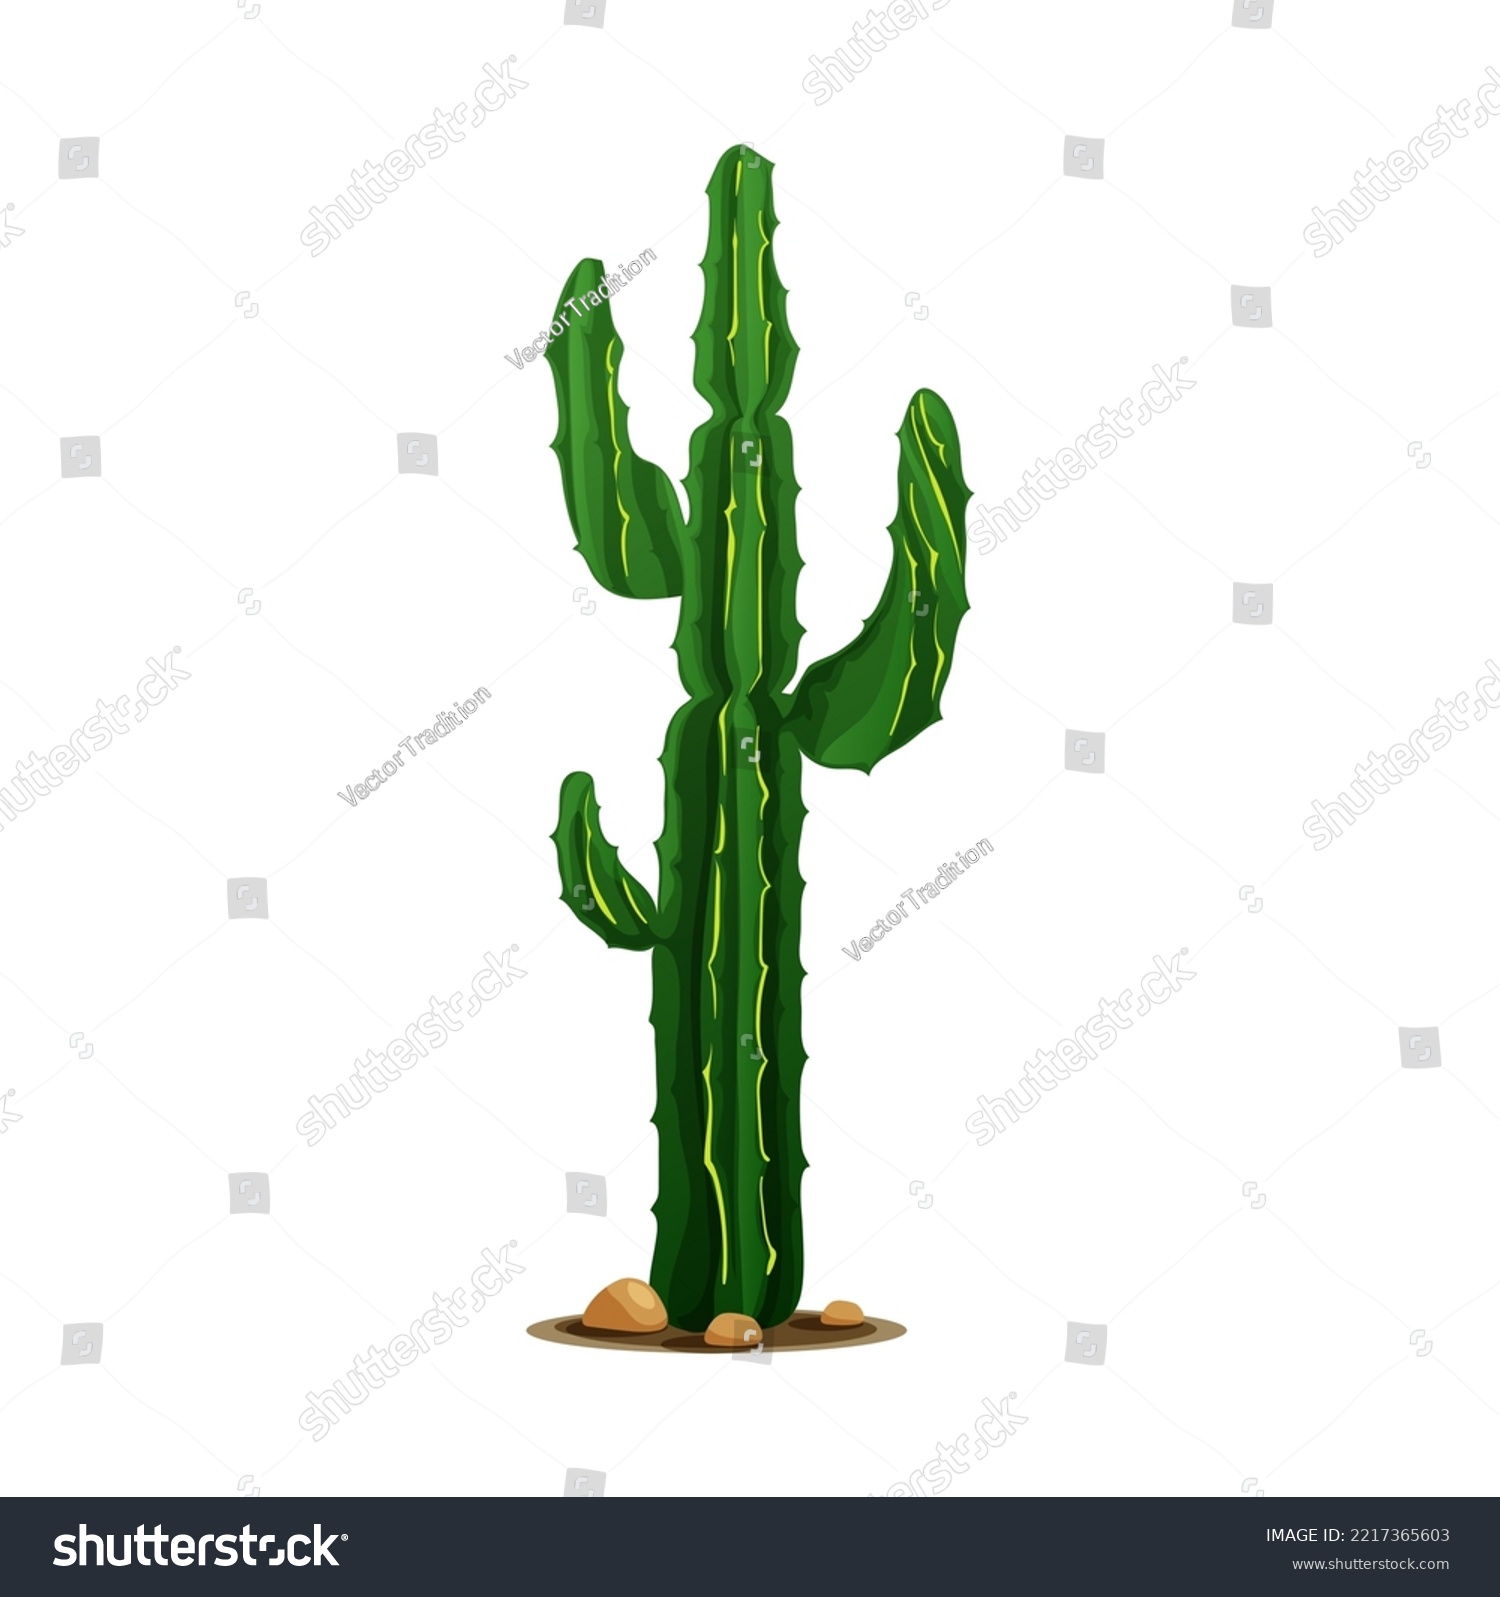 SVG of Cartoon prickly succulent, mexican giant cardon or elephant cactus isolated western tropical plant grown in desert. Vector prickly plant tall spiky tree, indians and native americans cacti with thorns svg